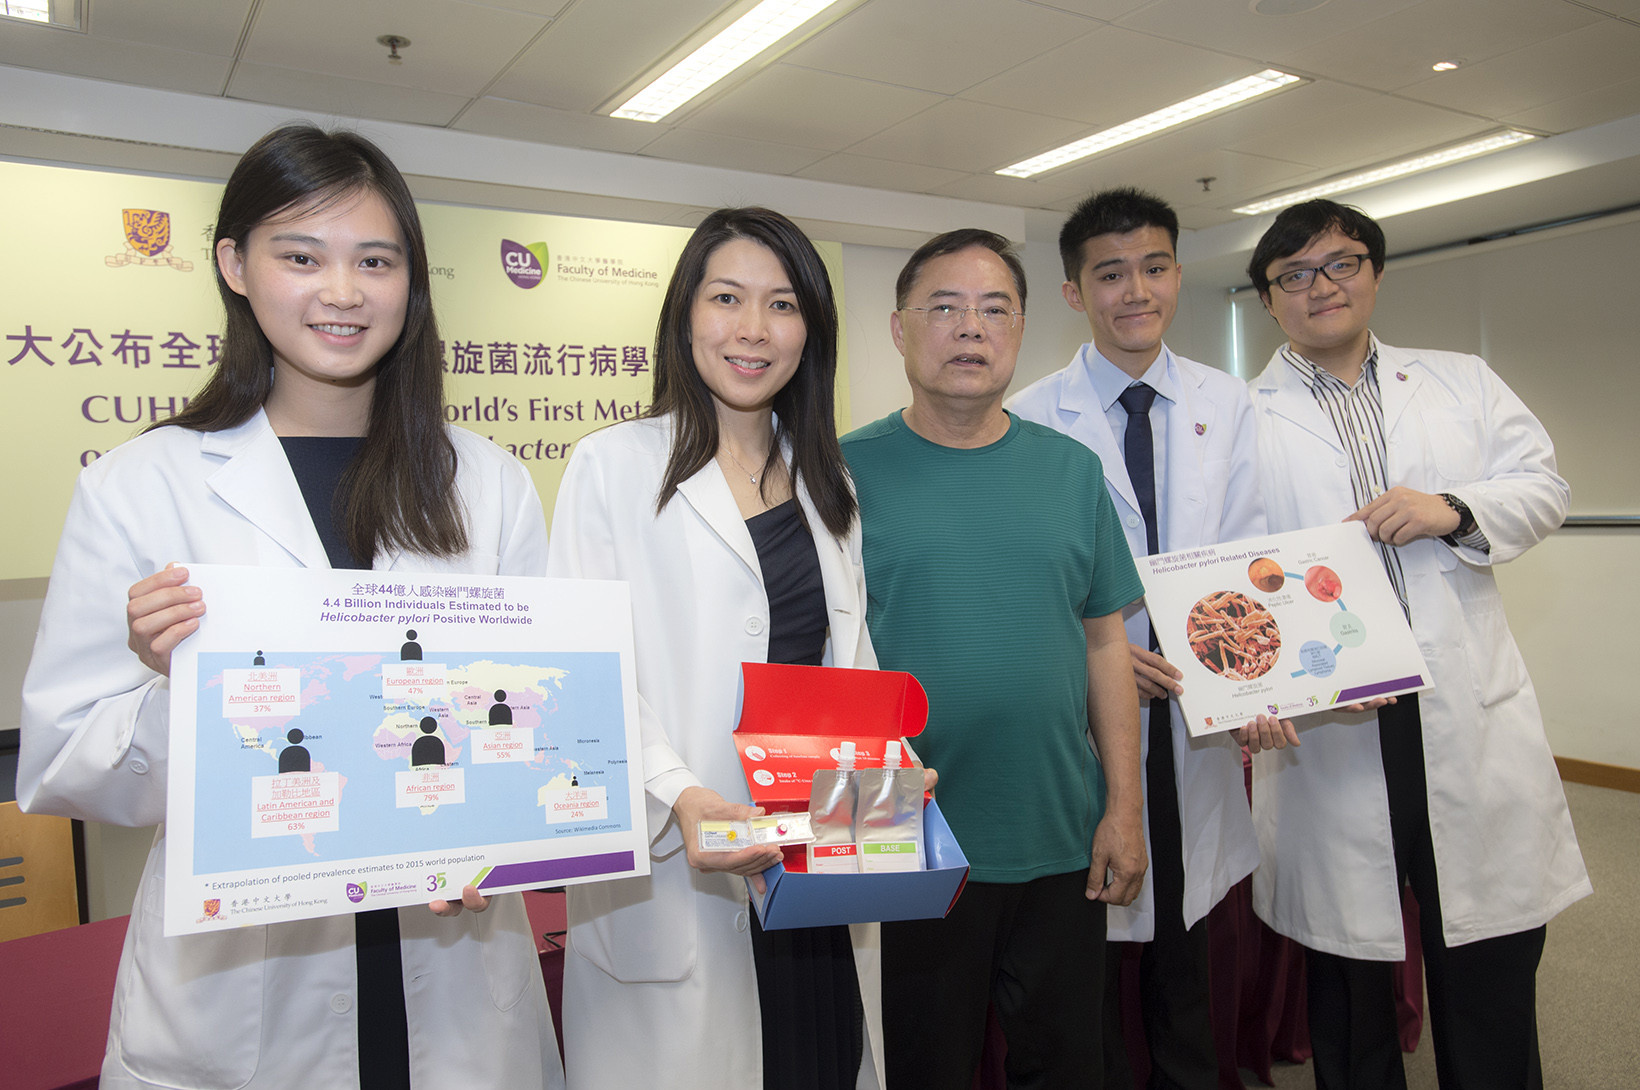 Our students, Ms. Prilla TSANG and Ms. Candy KANG, are the first two undergraduate students in Hong Kong listed as co-first authors in an international leading journal, International Journal of Cardiology.